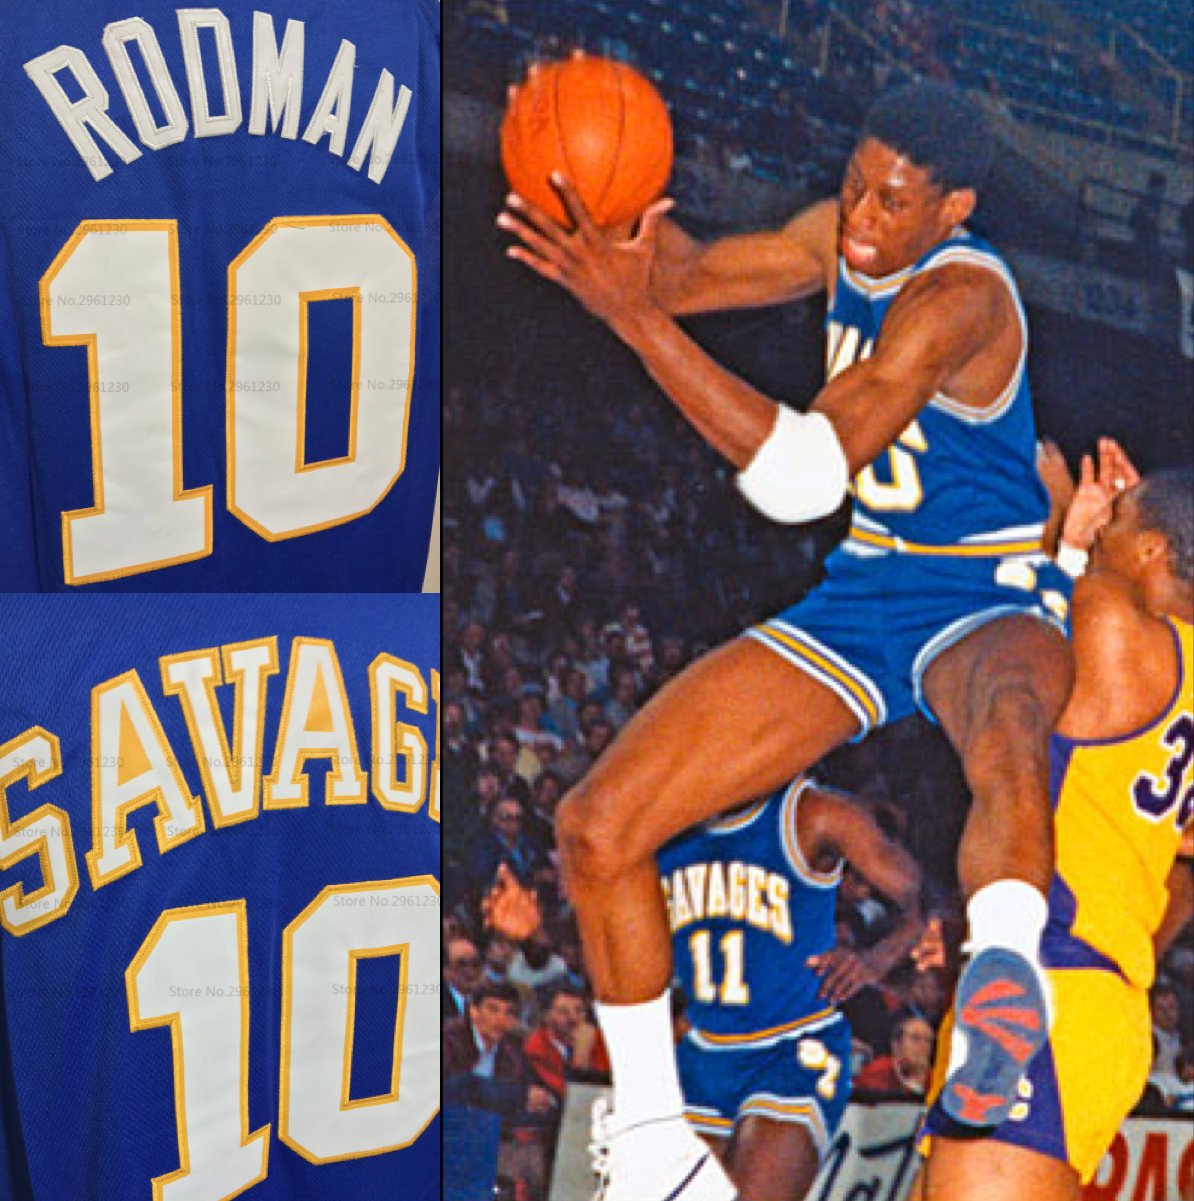 Dennis Rodman #10 Oklahoma Savages Basketball Jersey – 99Jersey®: Your  Ultimate Destination for Unique Jerseys, Shorts, and More